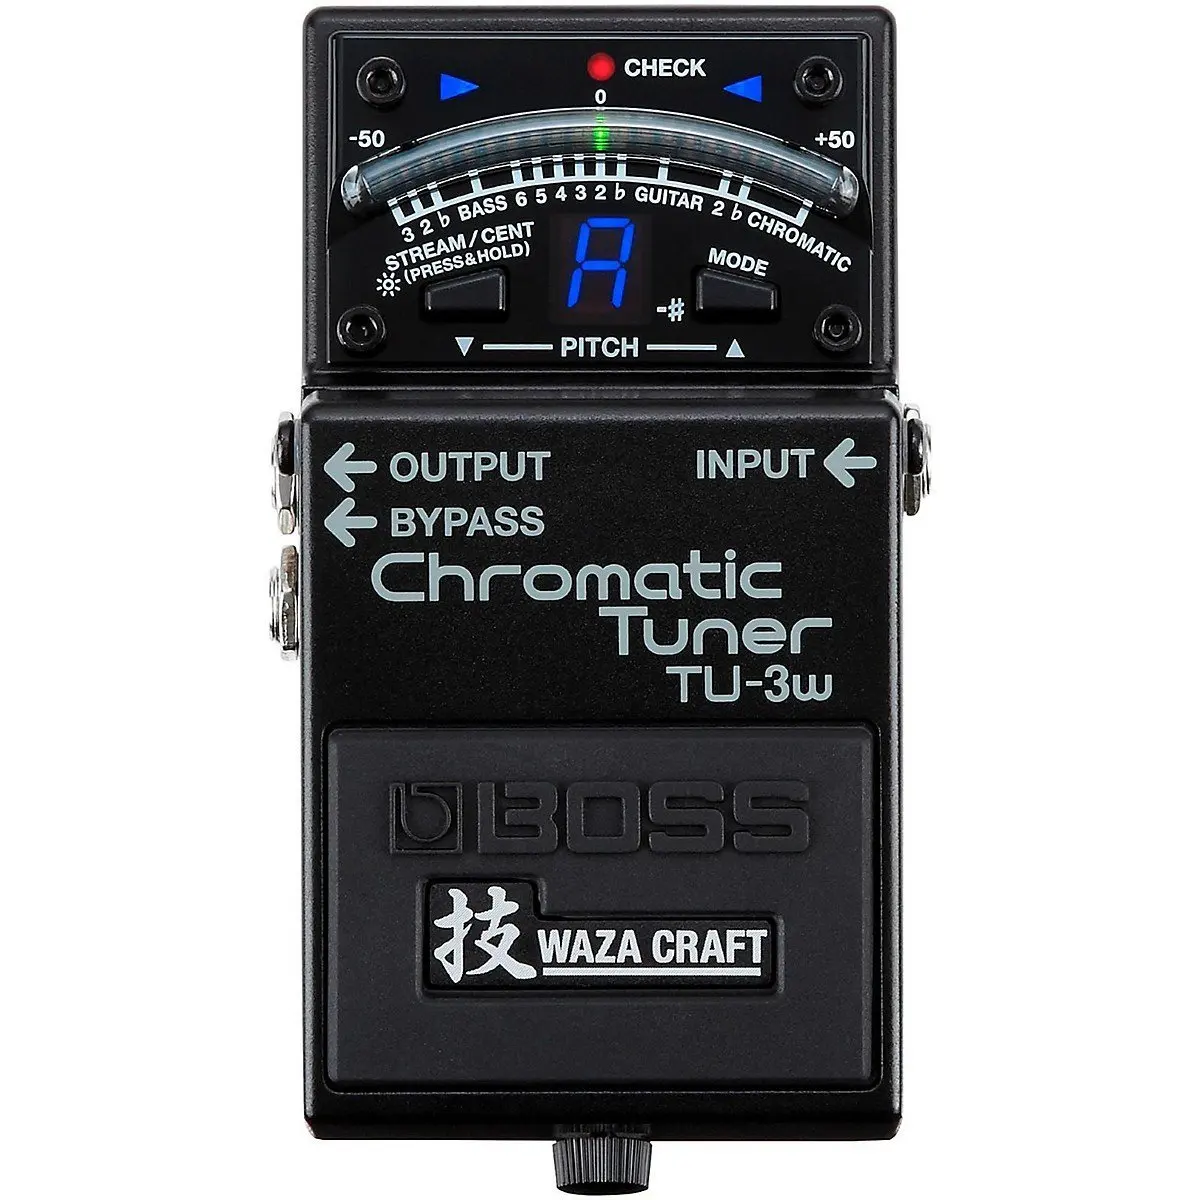 

Boss TU-3W Waza Craft Chromatic Tuner with Bypass Guitar and Bass Tuner Pedal with Free Bonus Pedal Case